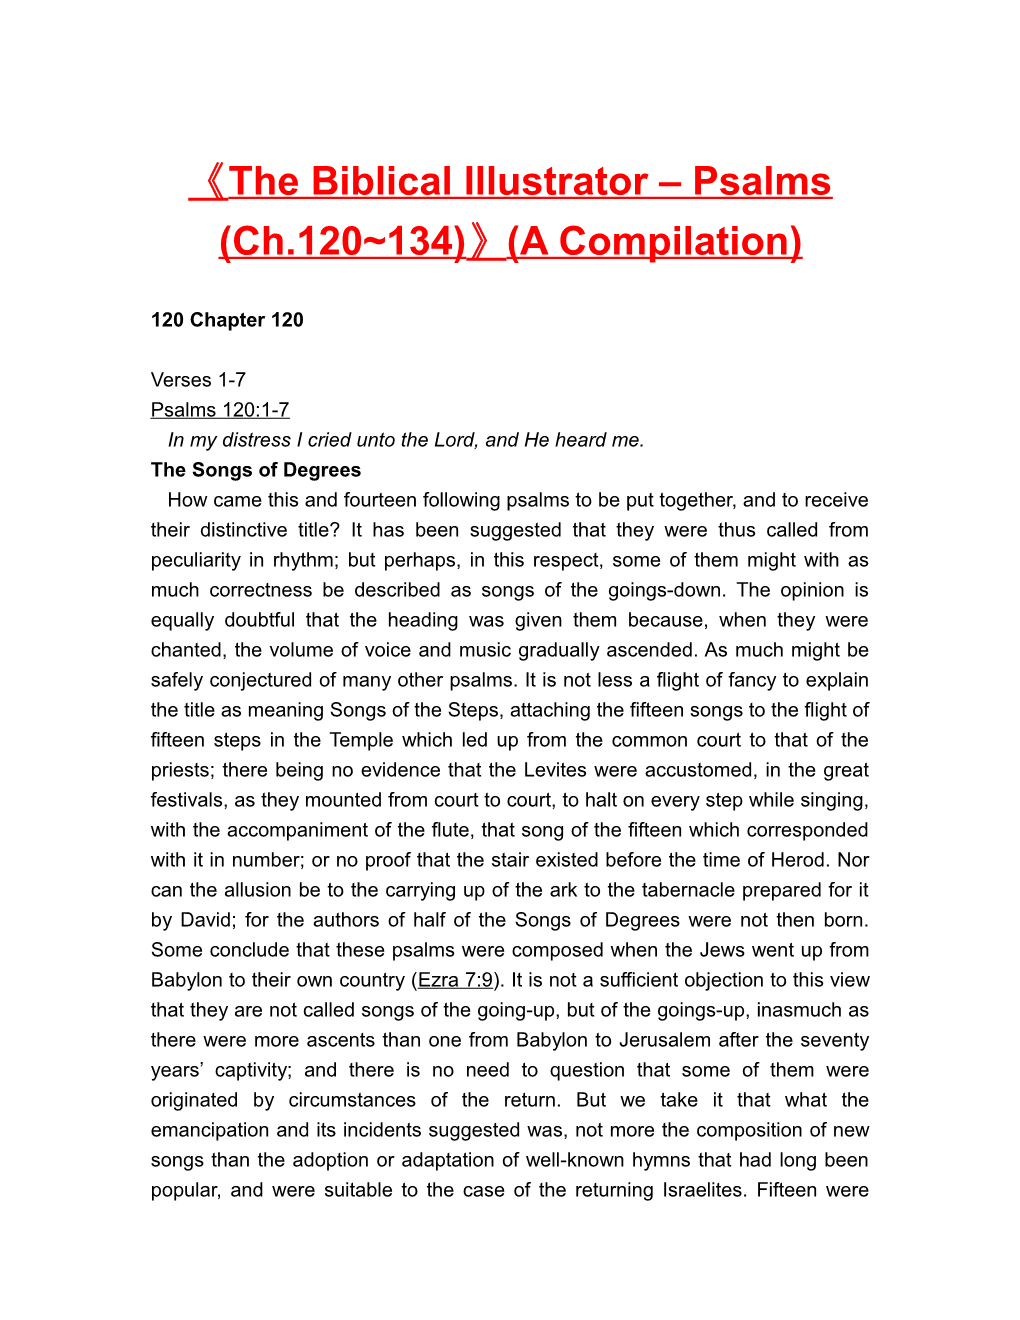 The Biblical Illustrator Psalms (Ch.120 134) (A Compilation)